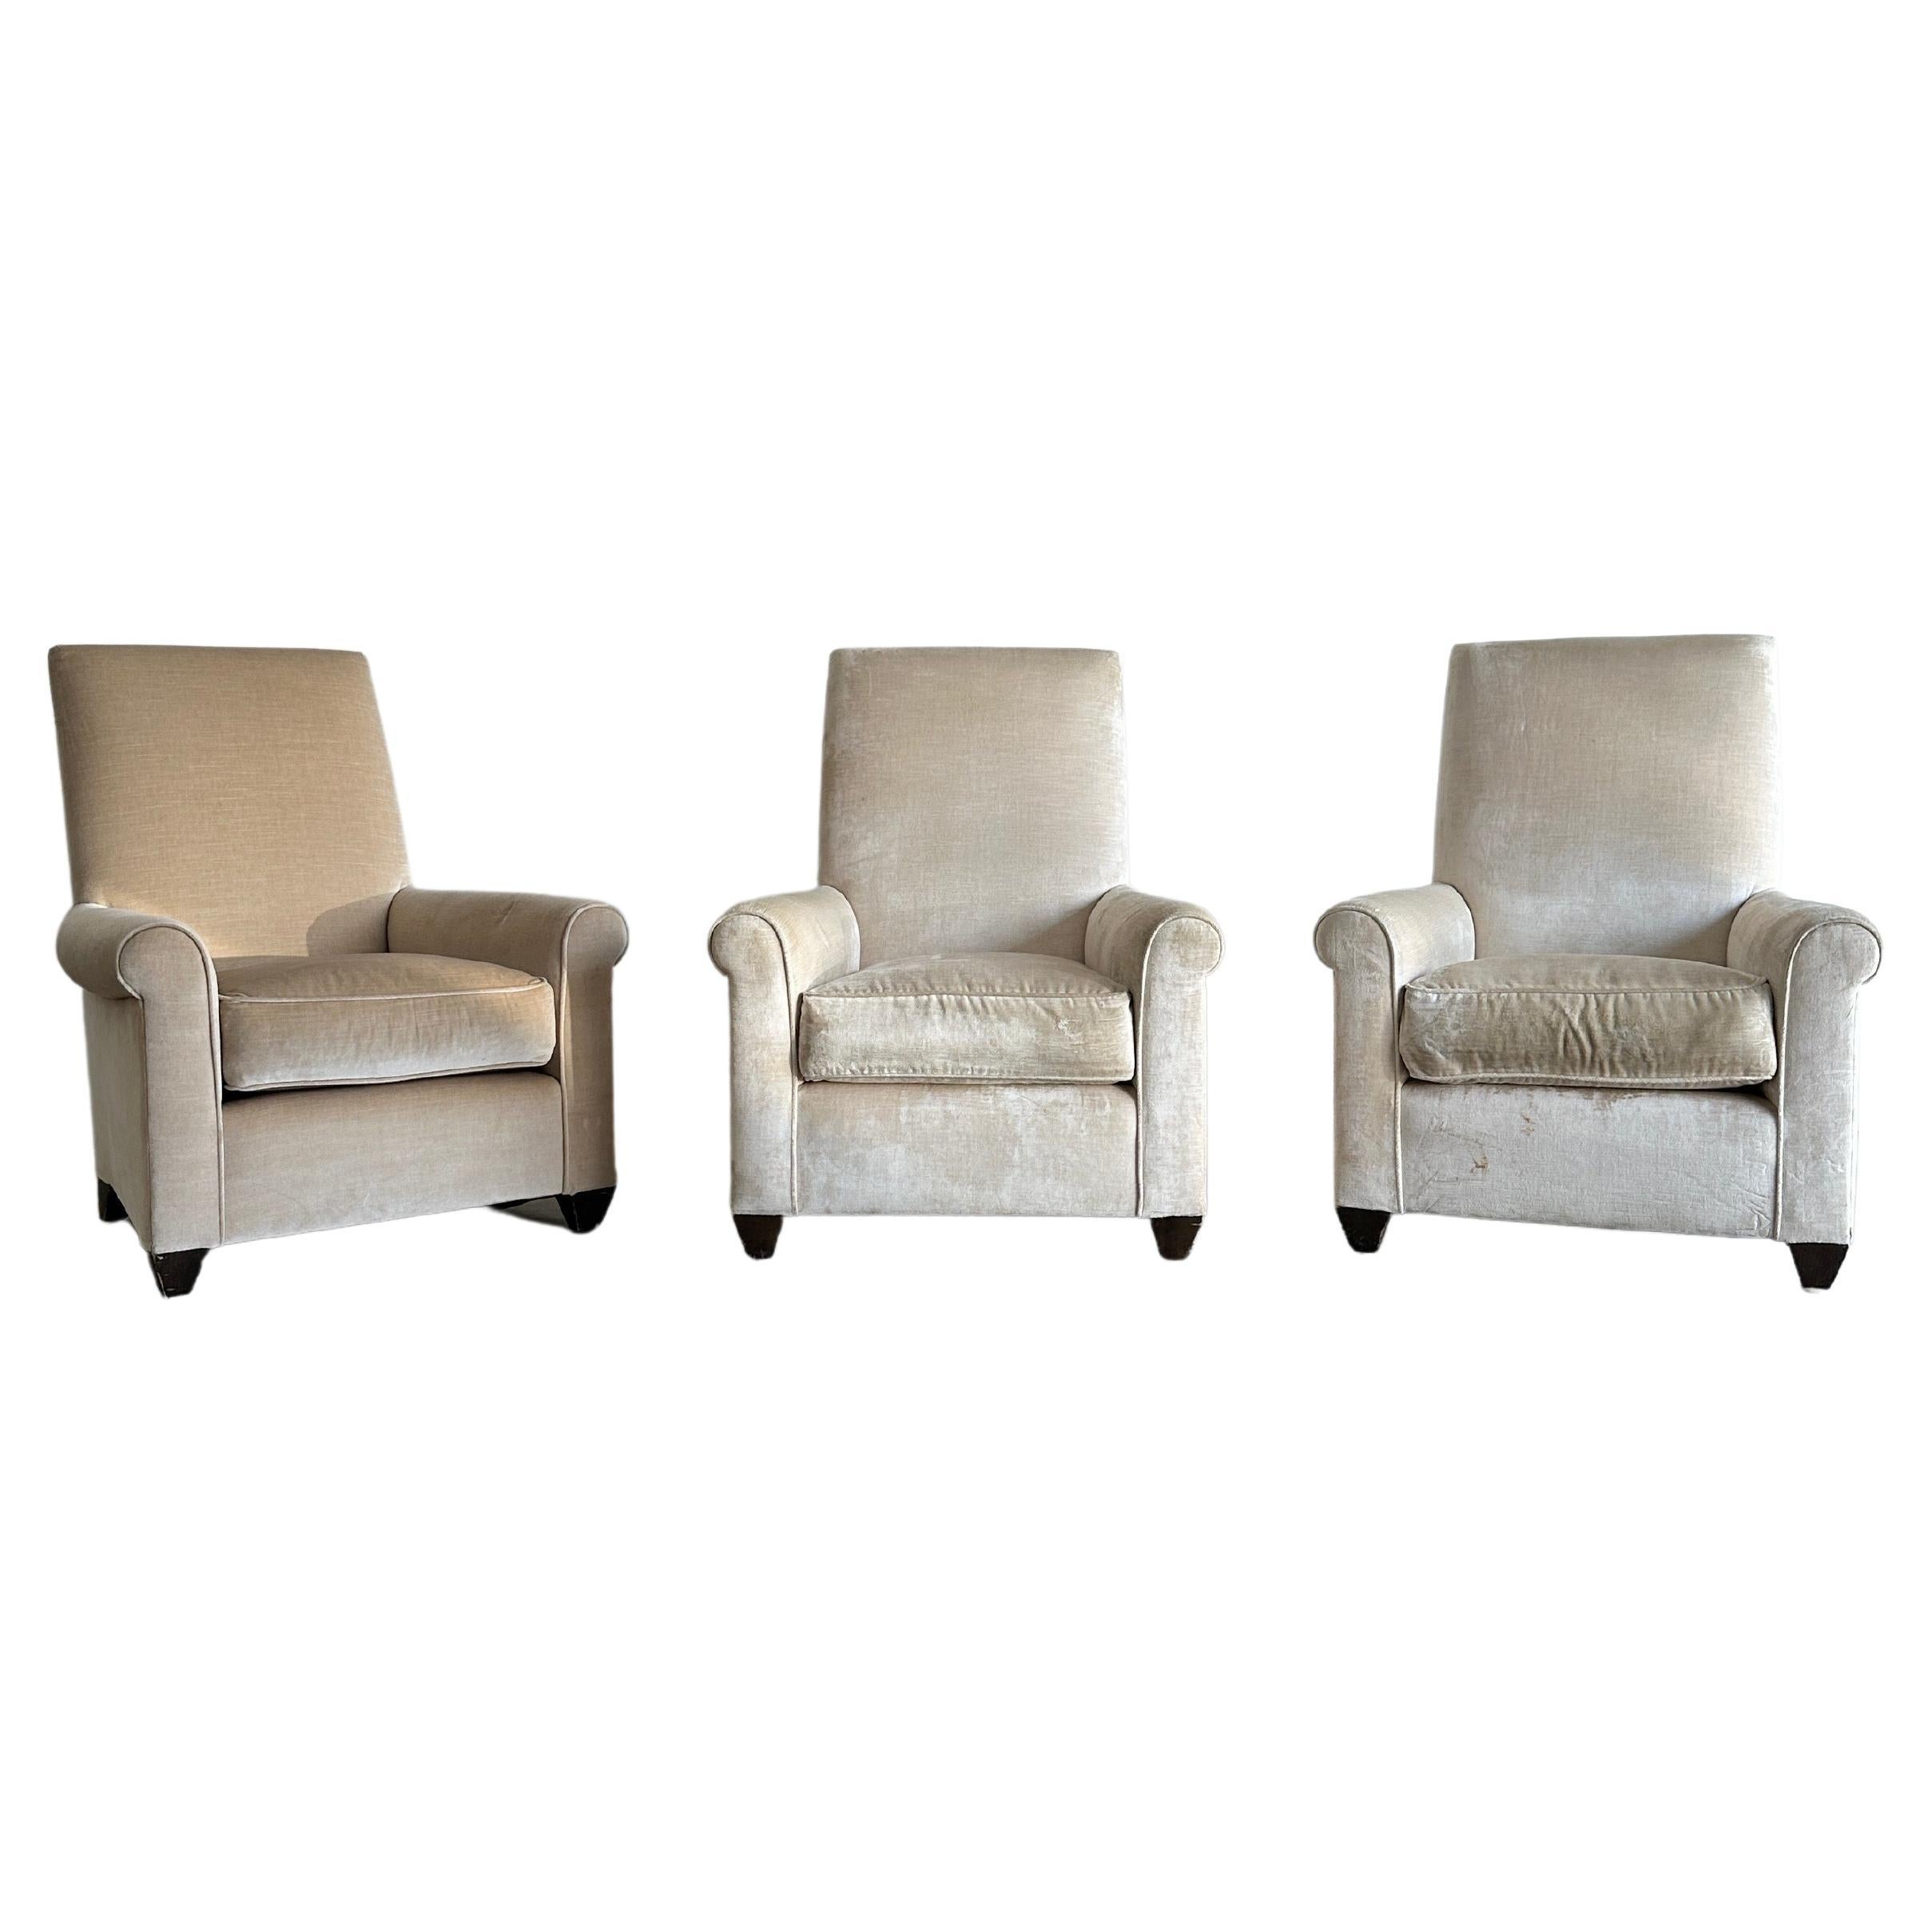 St. James chair by Angelo Donghia for Donghia Inc